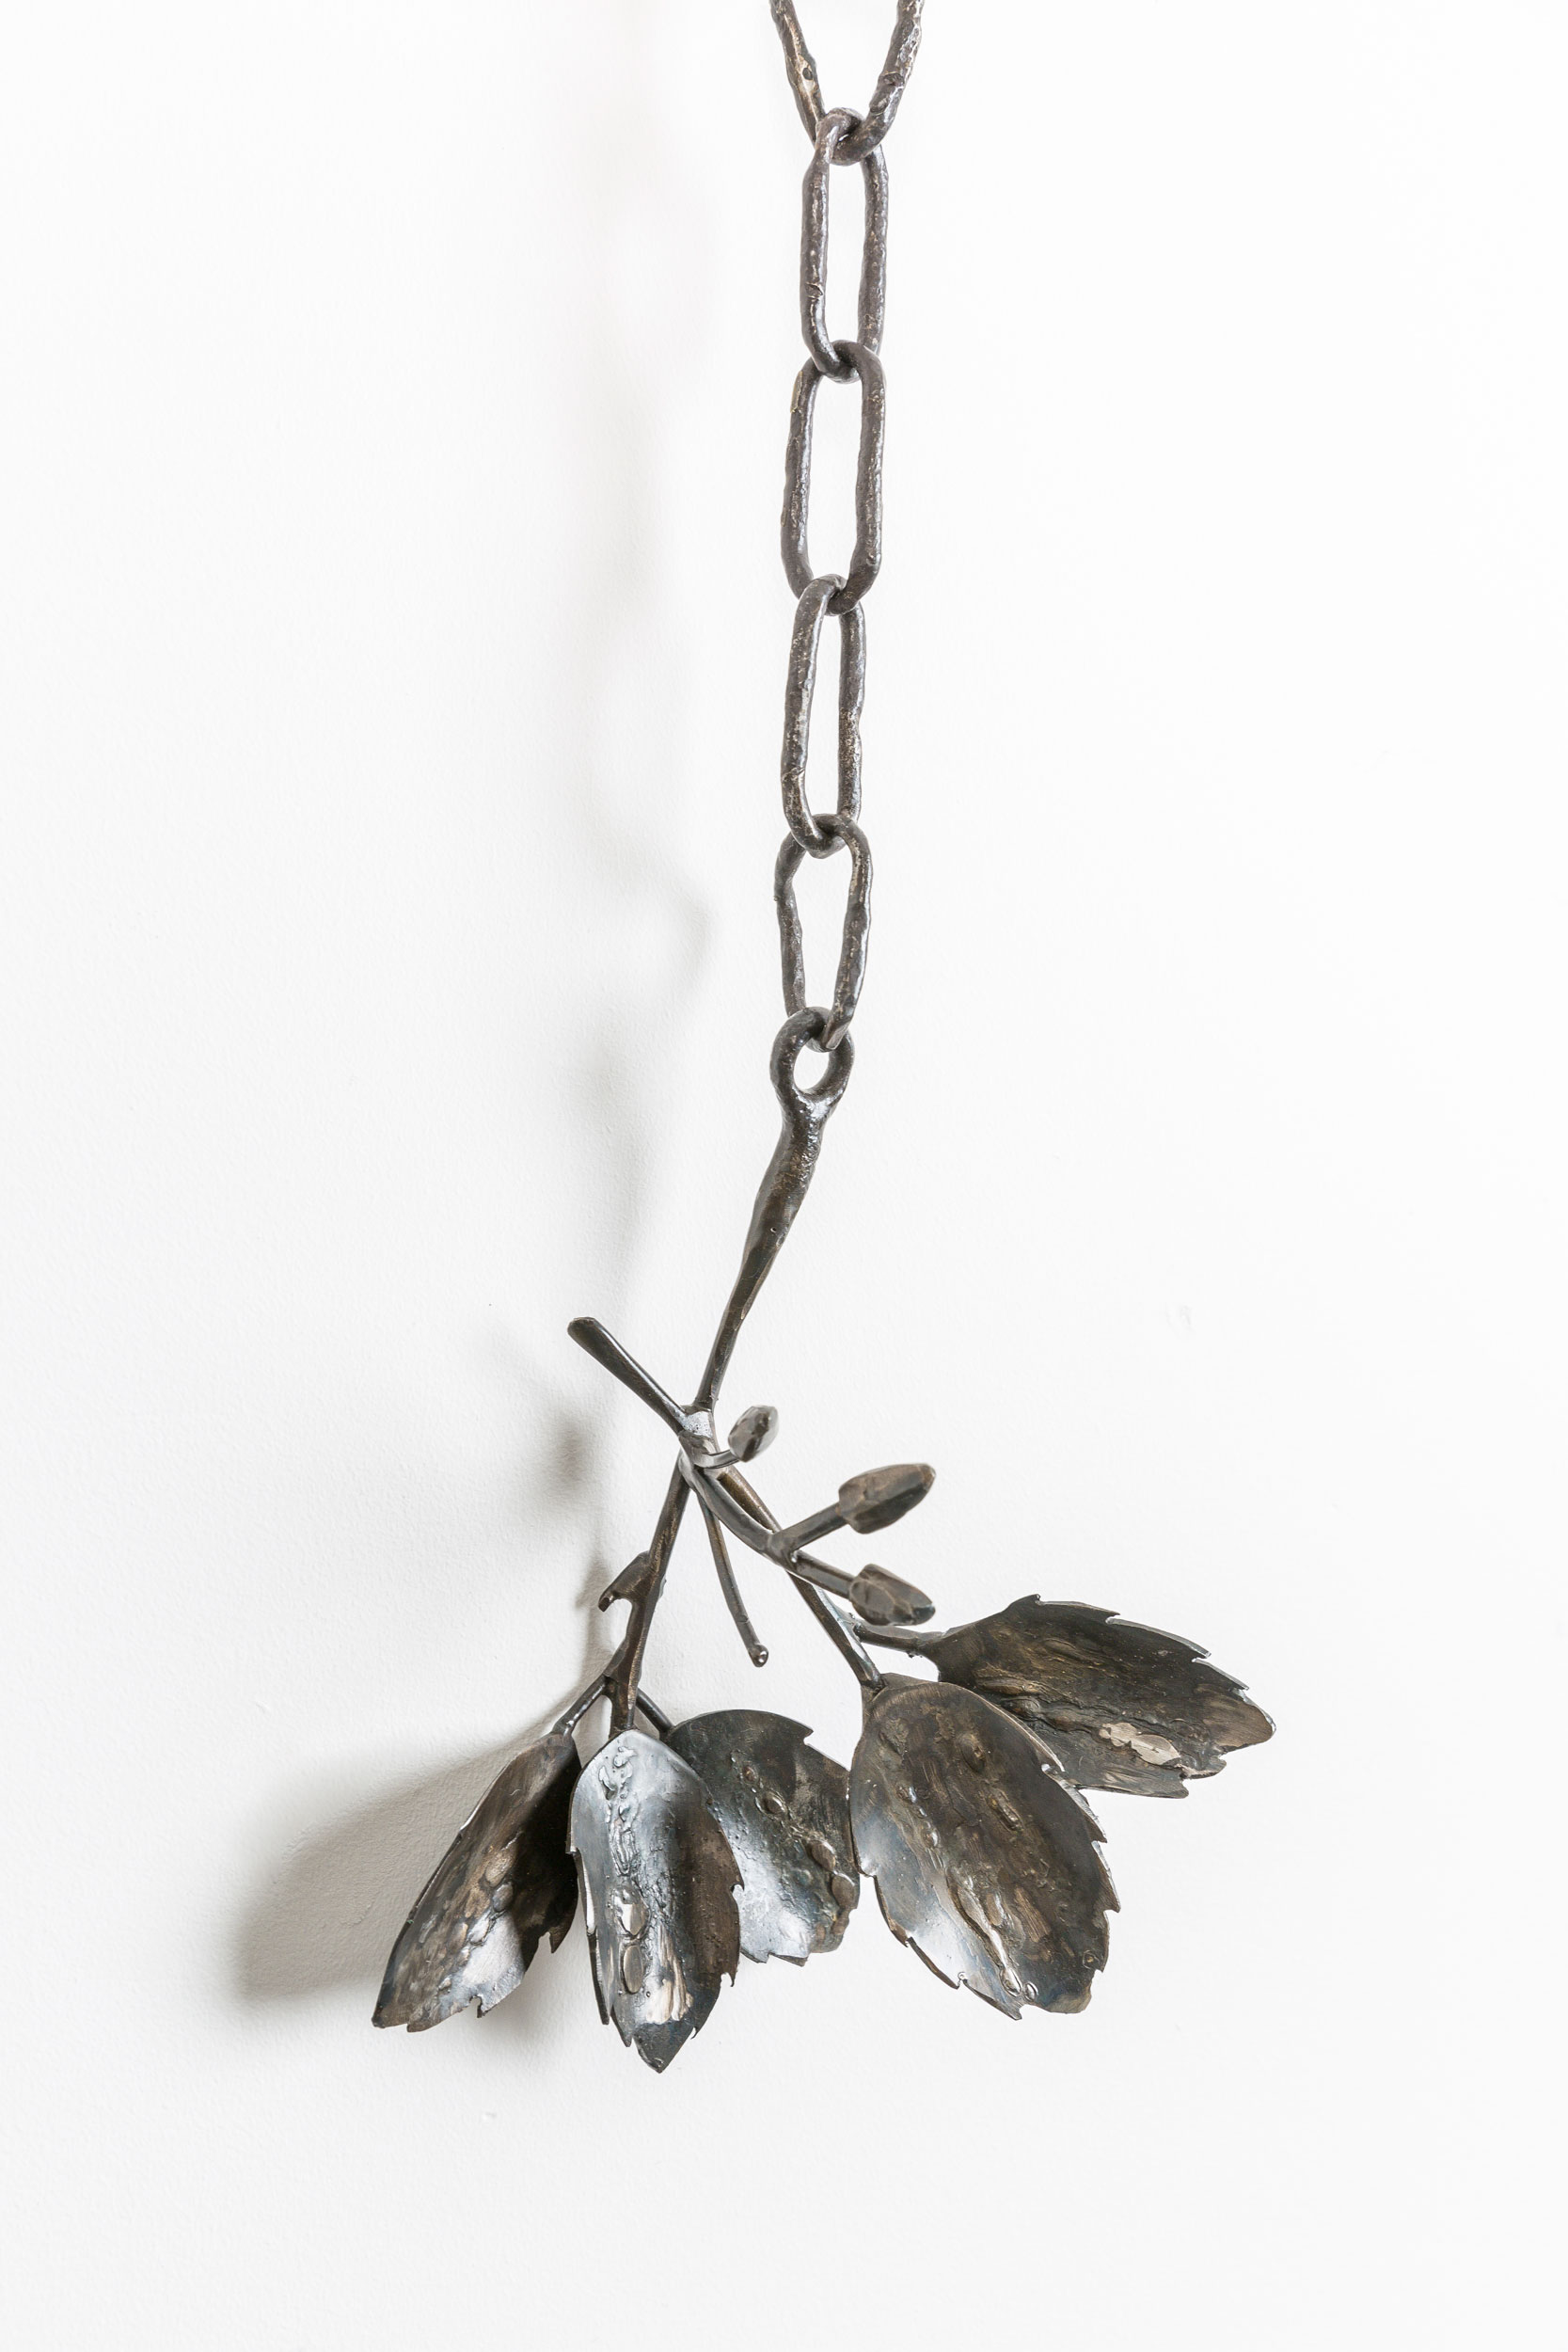  Old Growth (Strawberry), 2019, steel, dimensions variable, GBH Photography